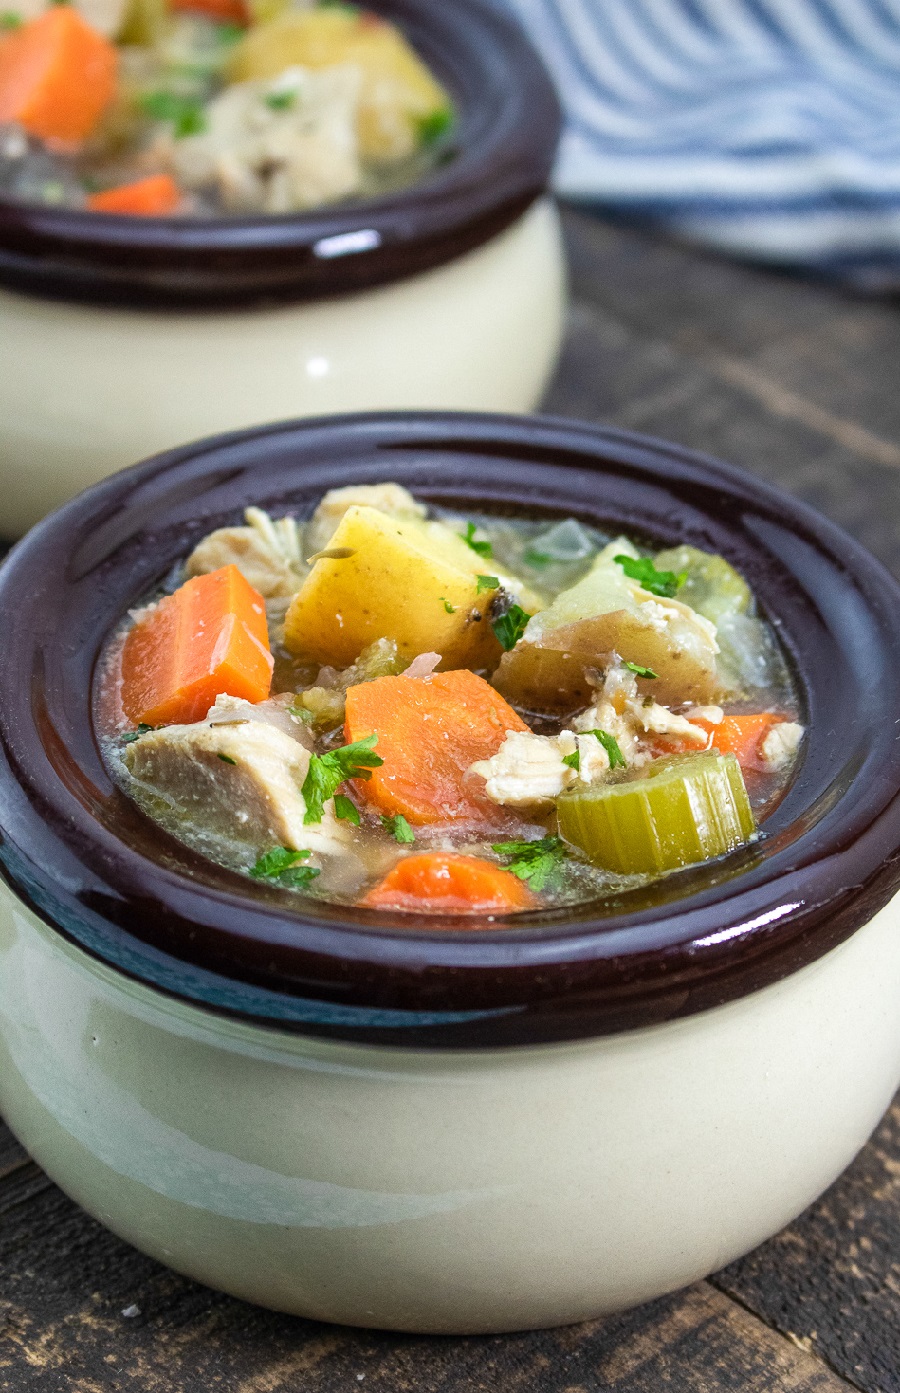 Slow Cooker Chicken Vegetable Stew Recipe - The Free Cookbook Club